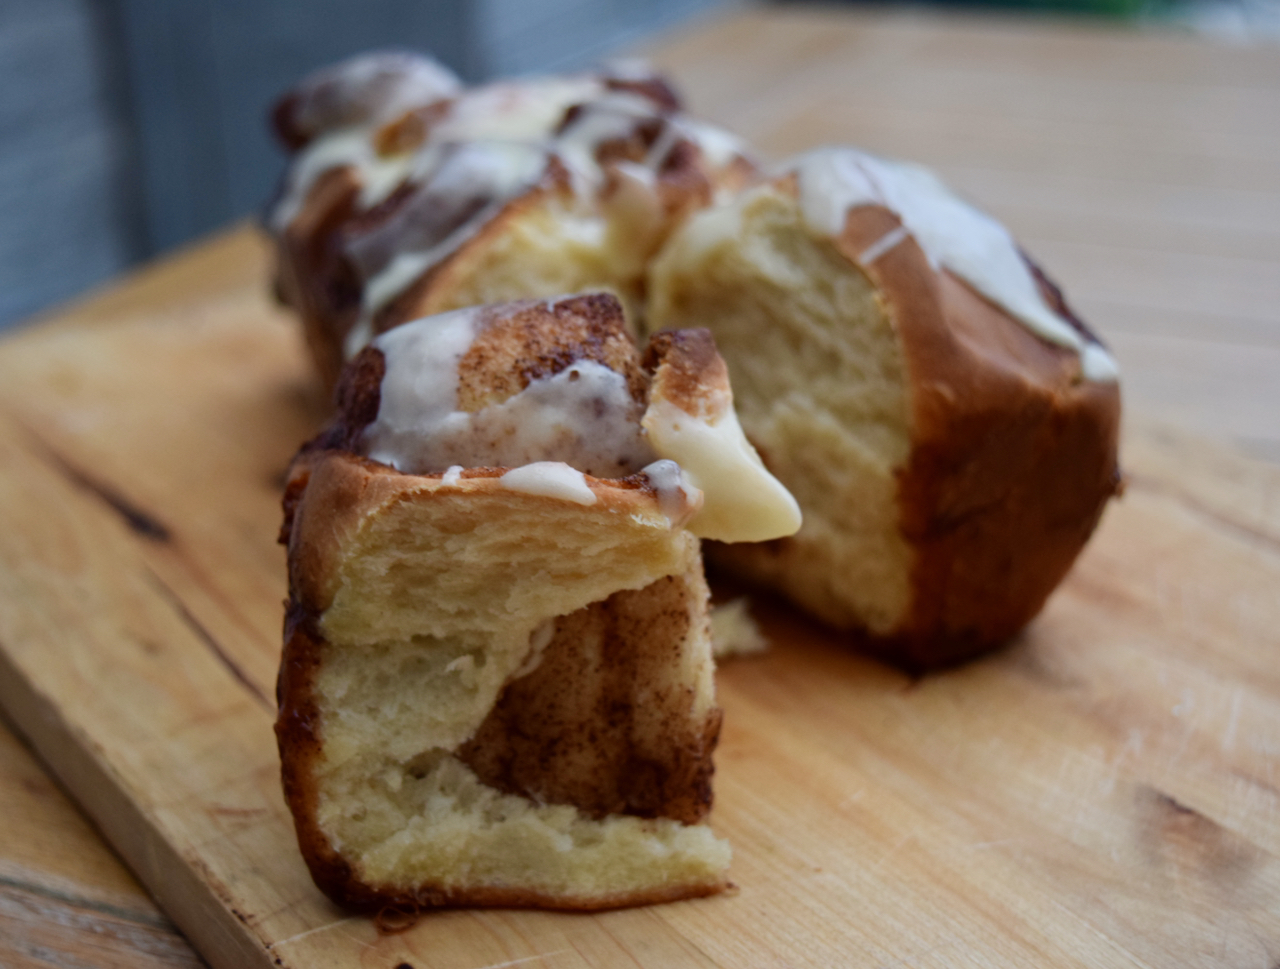 CInnamon Roll Sharing Loaf recipe from Lucy Loves Food Blog